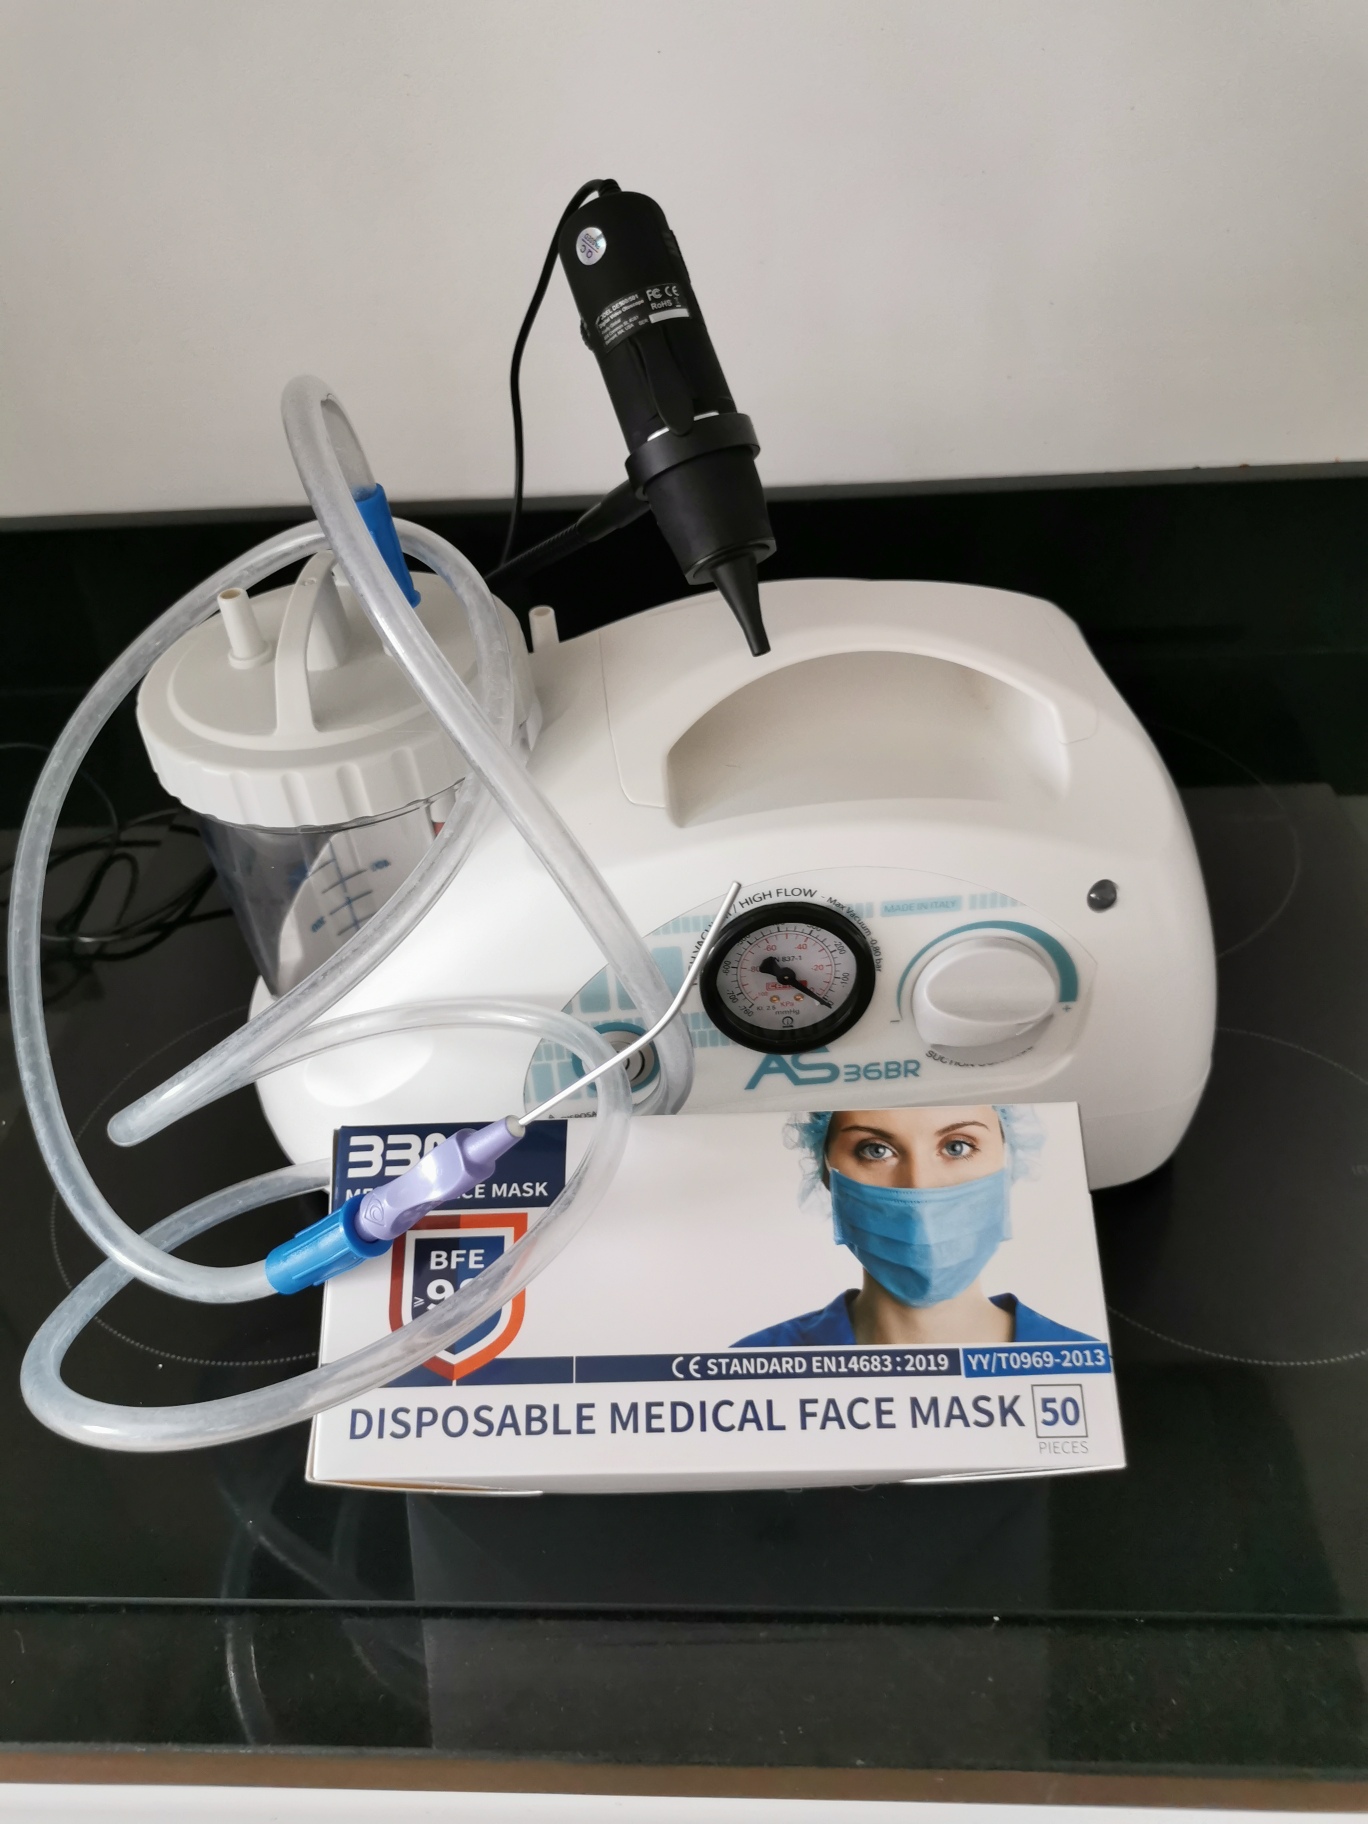 A Suction Machine and Otoscope